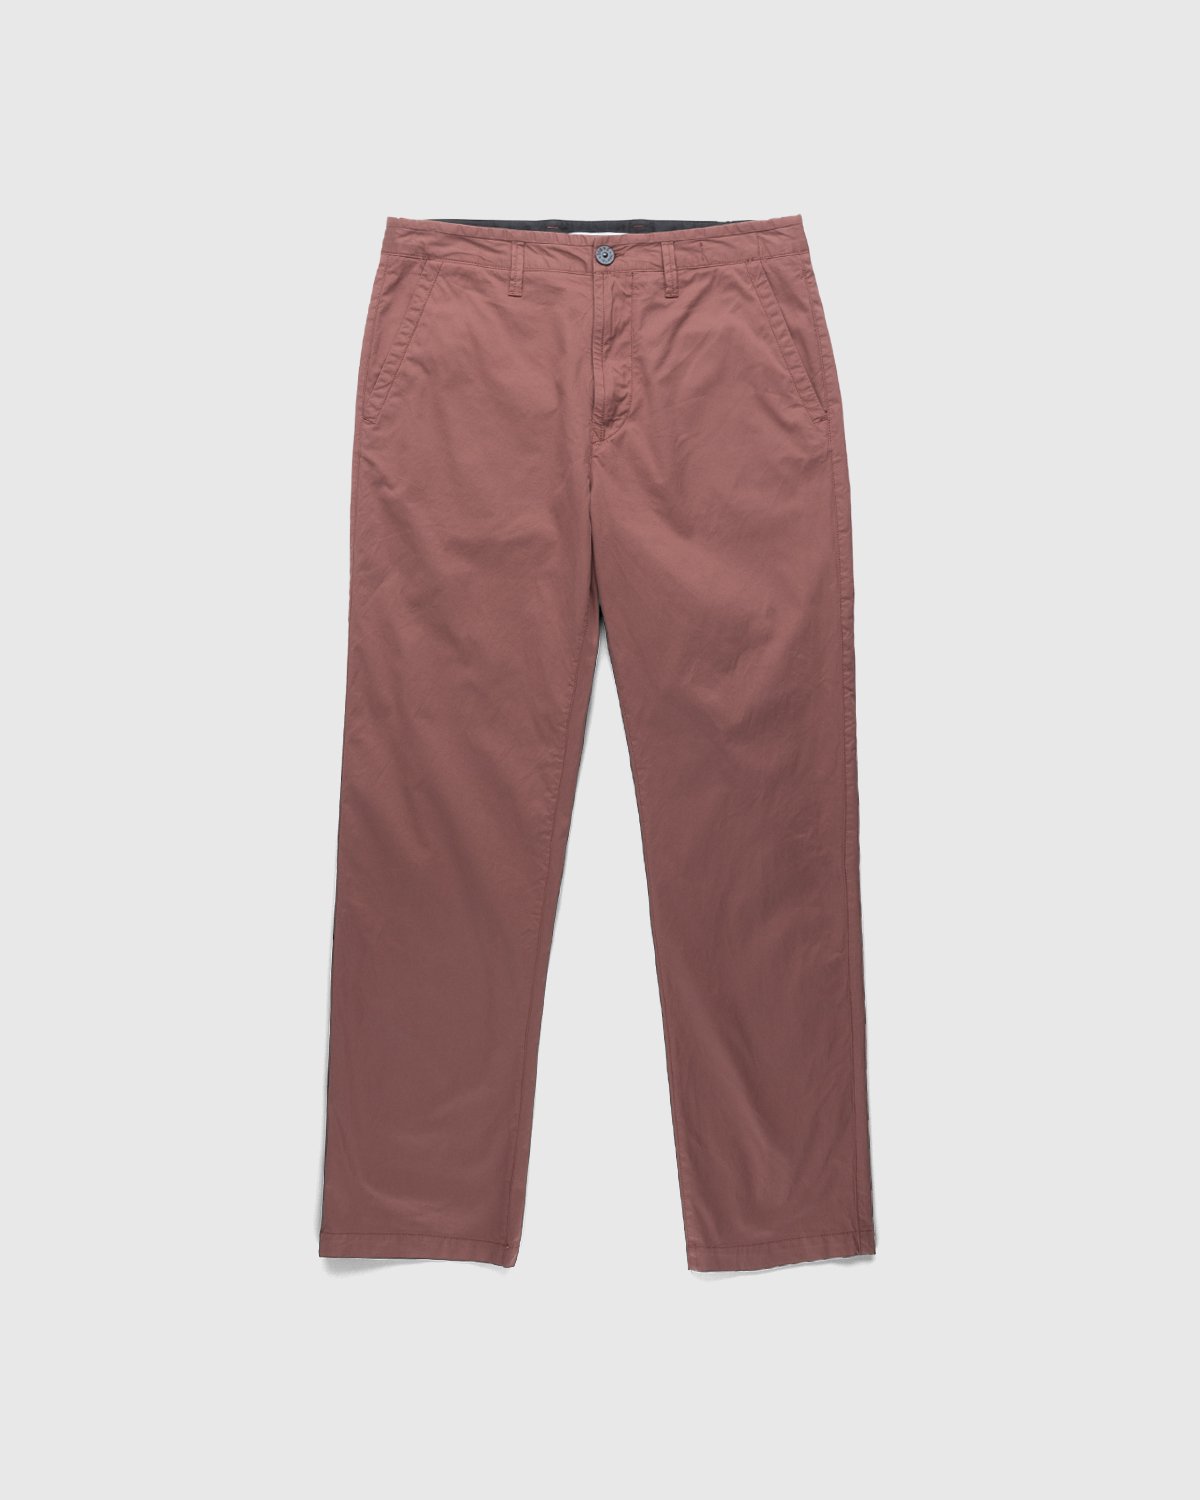 Stone Island - Pants Brick Red - Clothing - Red - Image 1